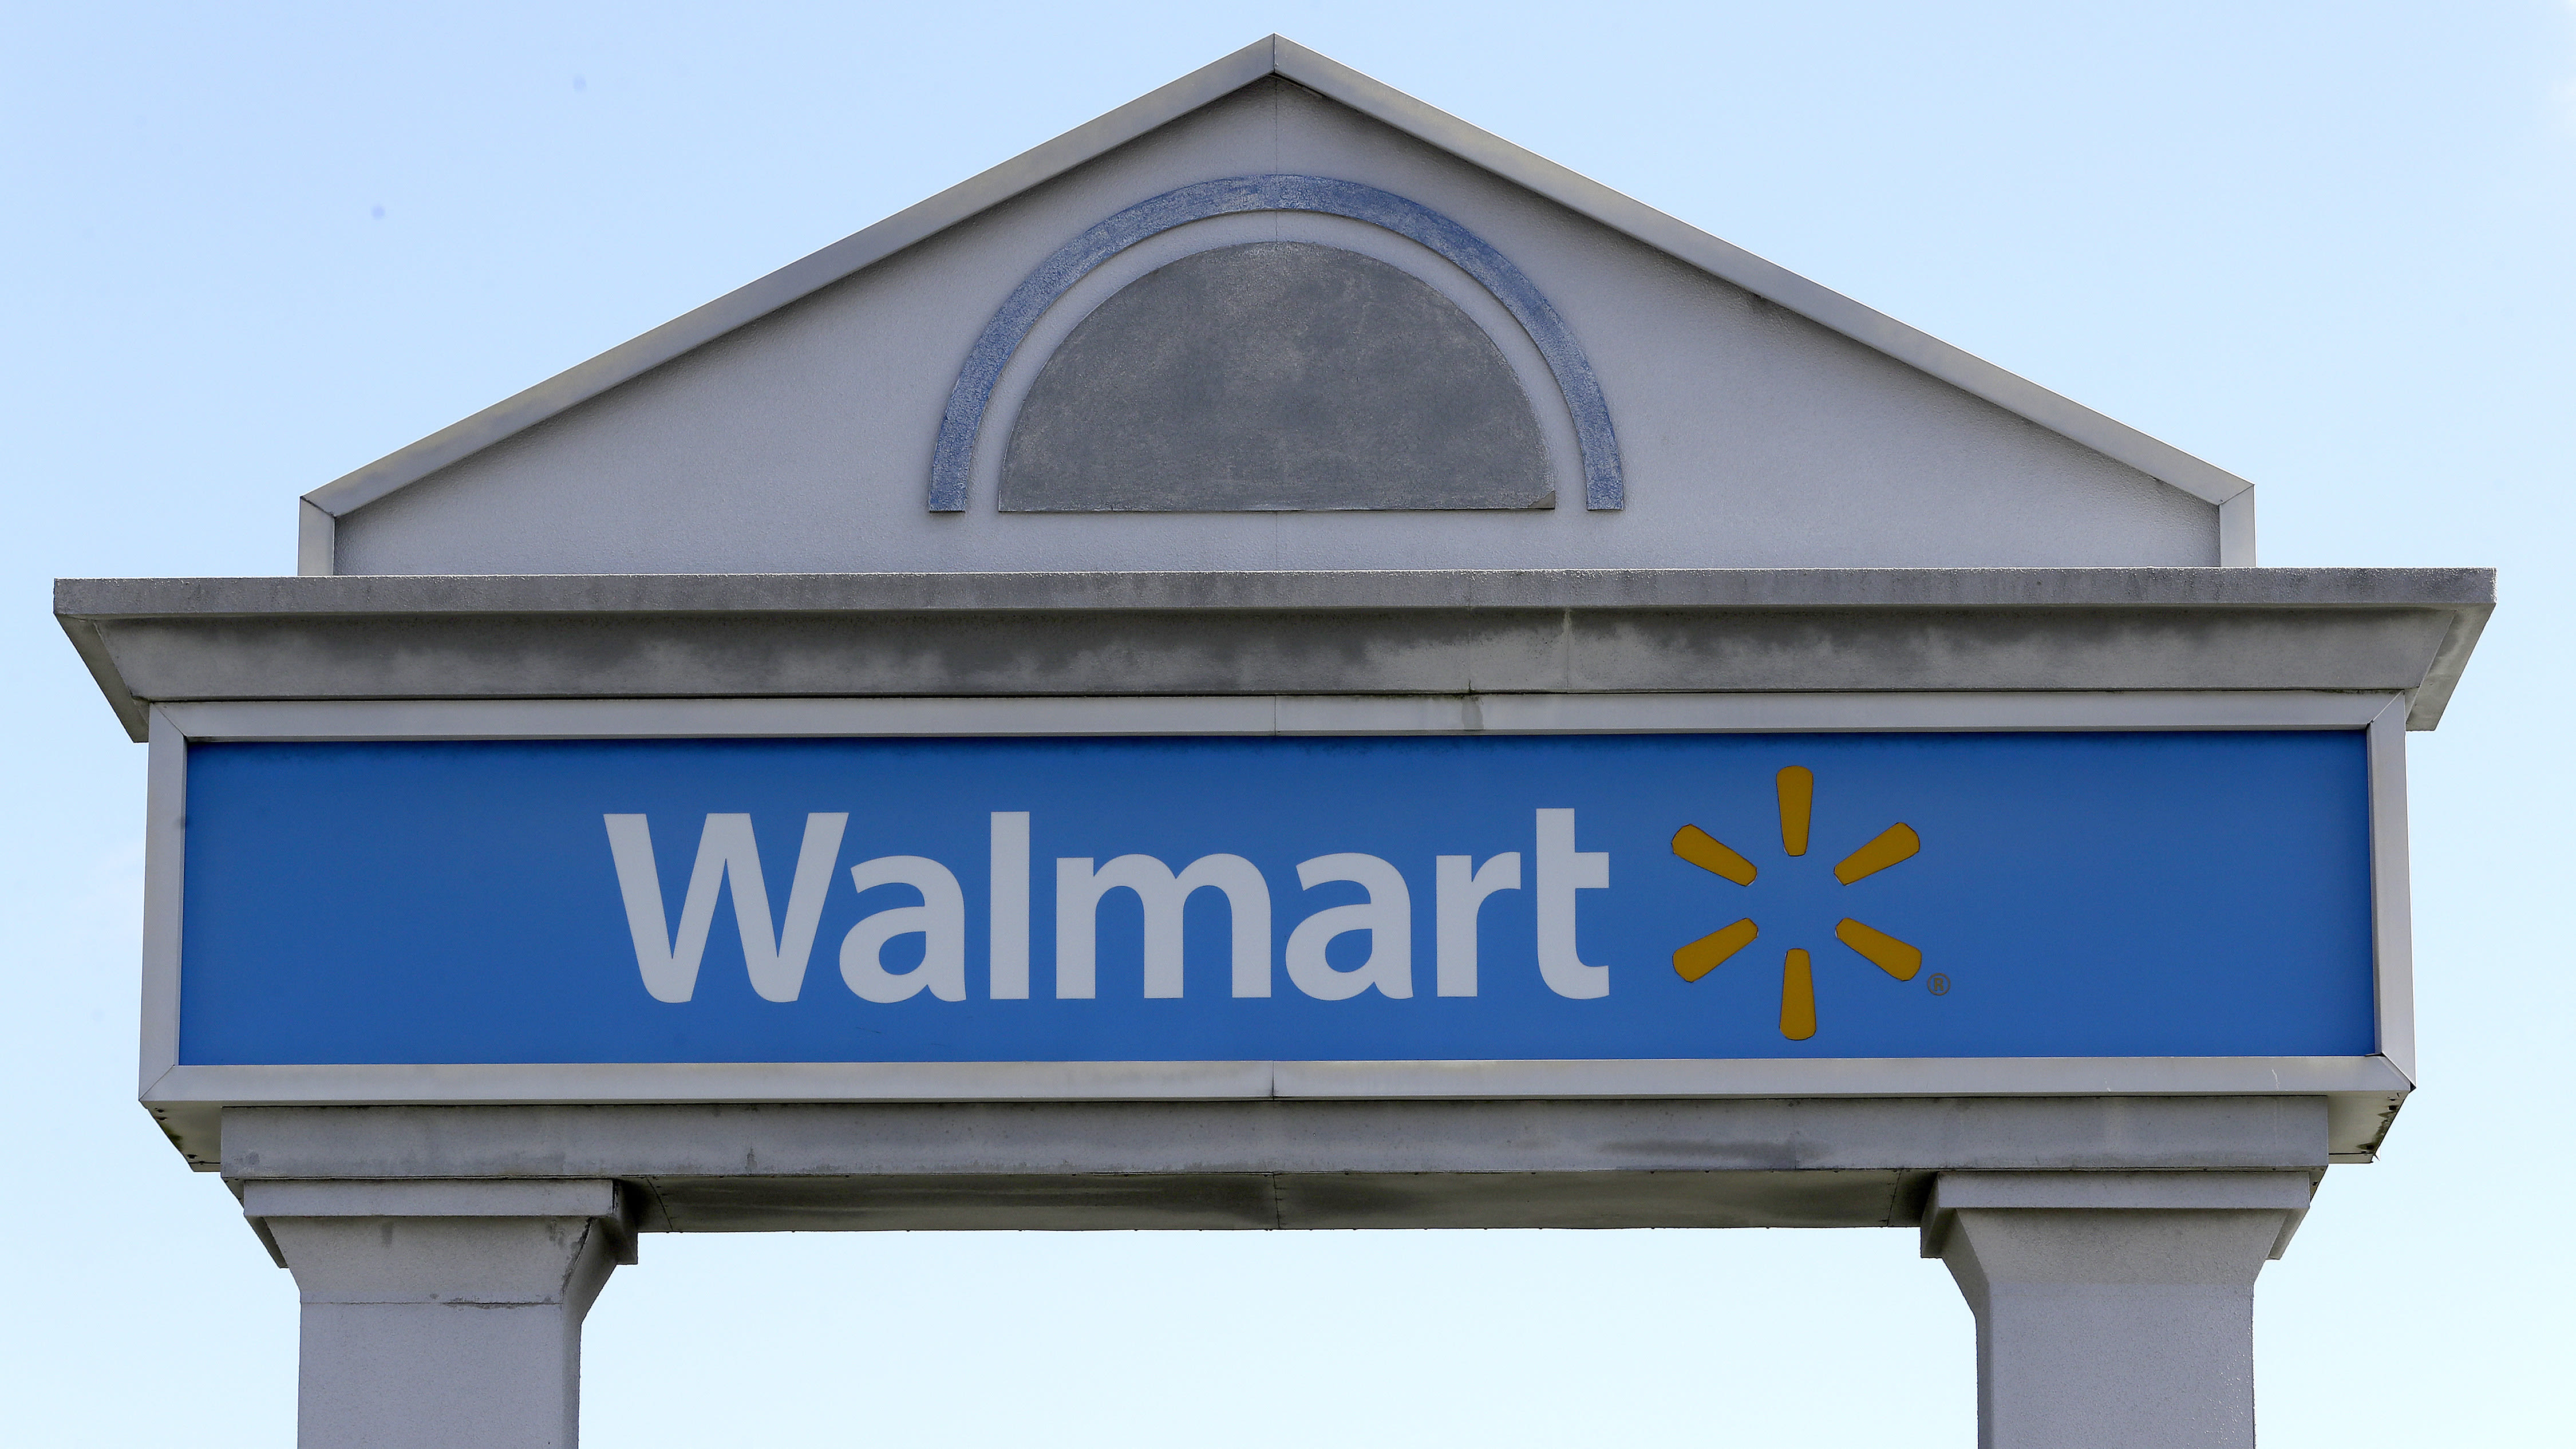 Walmart settlement deadline is Wednesday: How to join $45 million weighted-grocery lawsuit